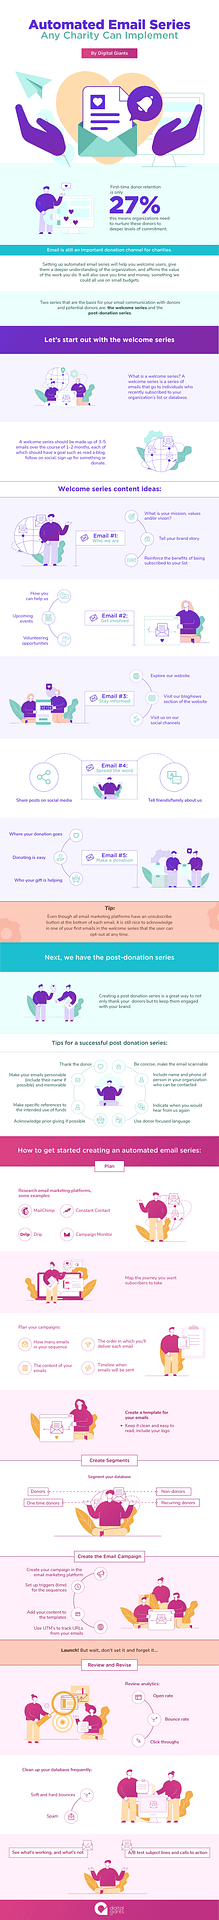 Automated Email Series, Emails from Charity, Infographic